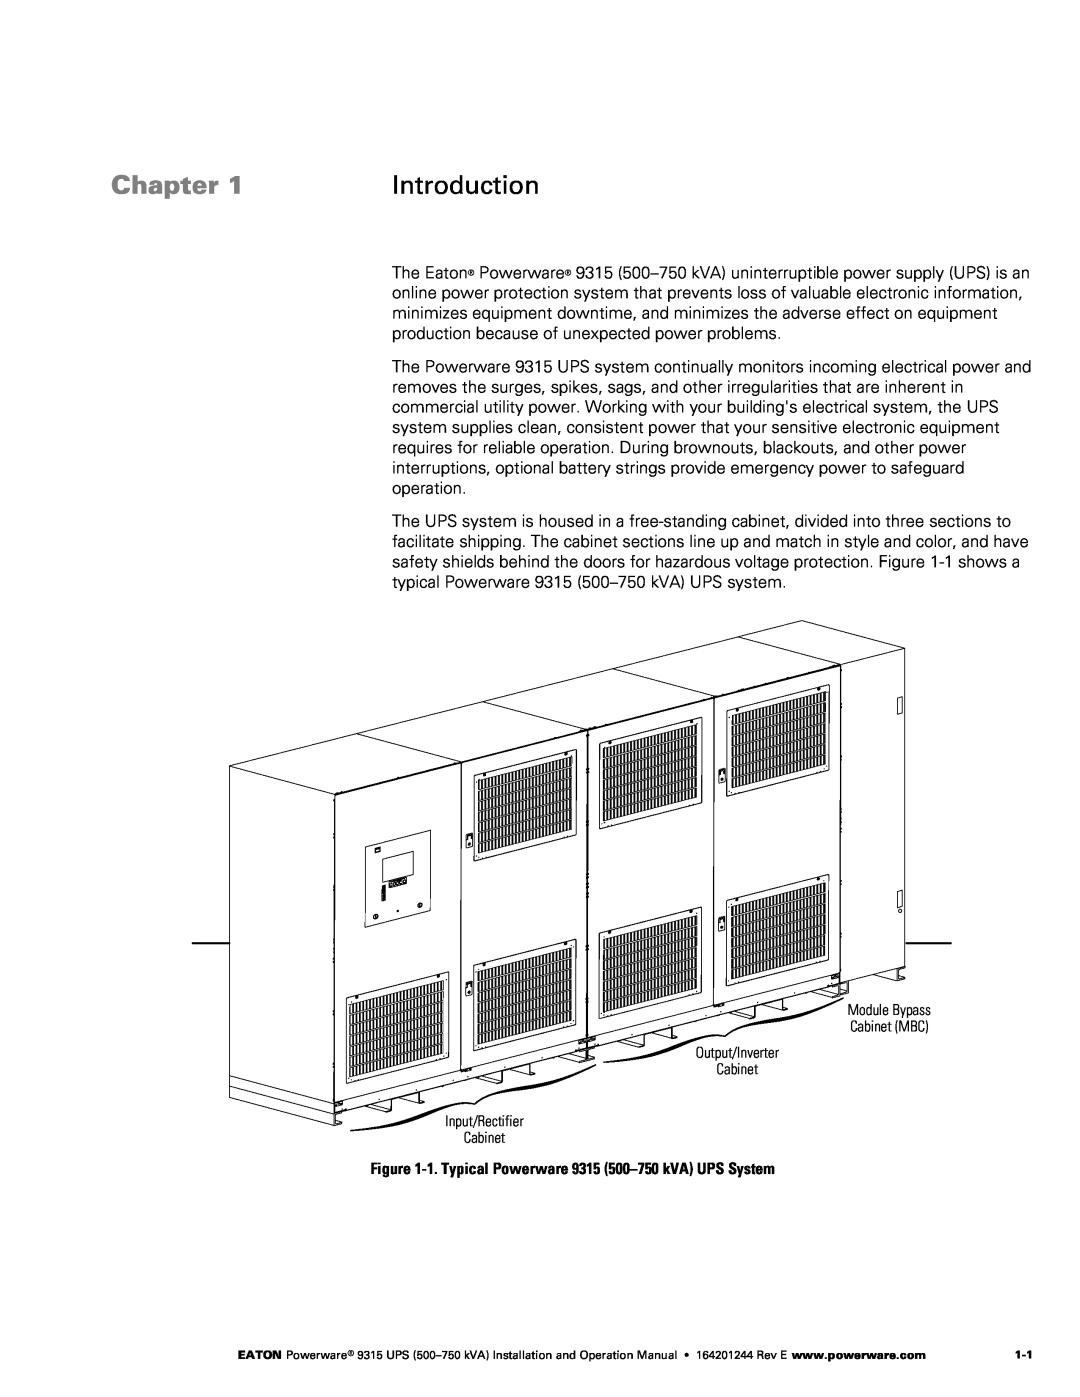 Powerware operation manual Chapter, Introduction, ‐1. Typical Powerware 9315 500-750 kVA UPS System 